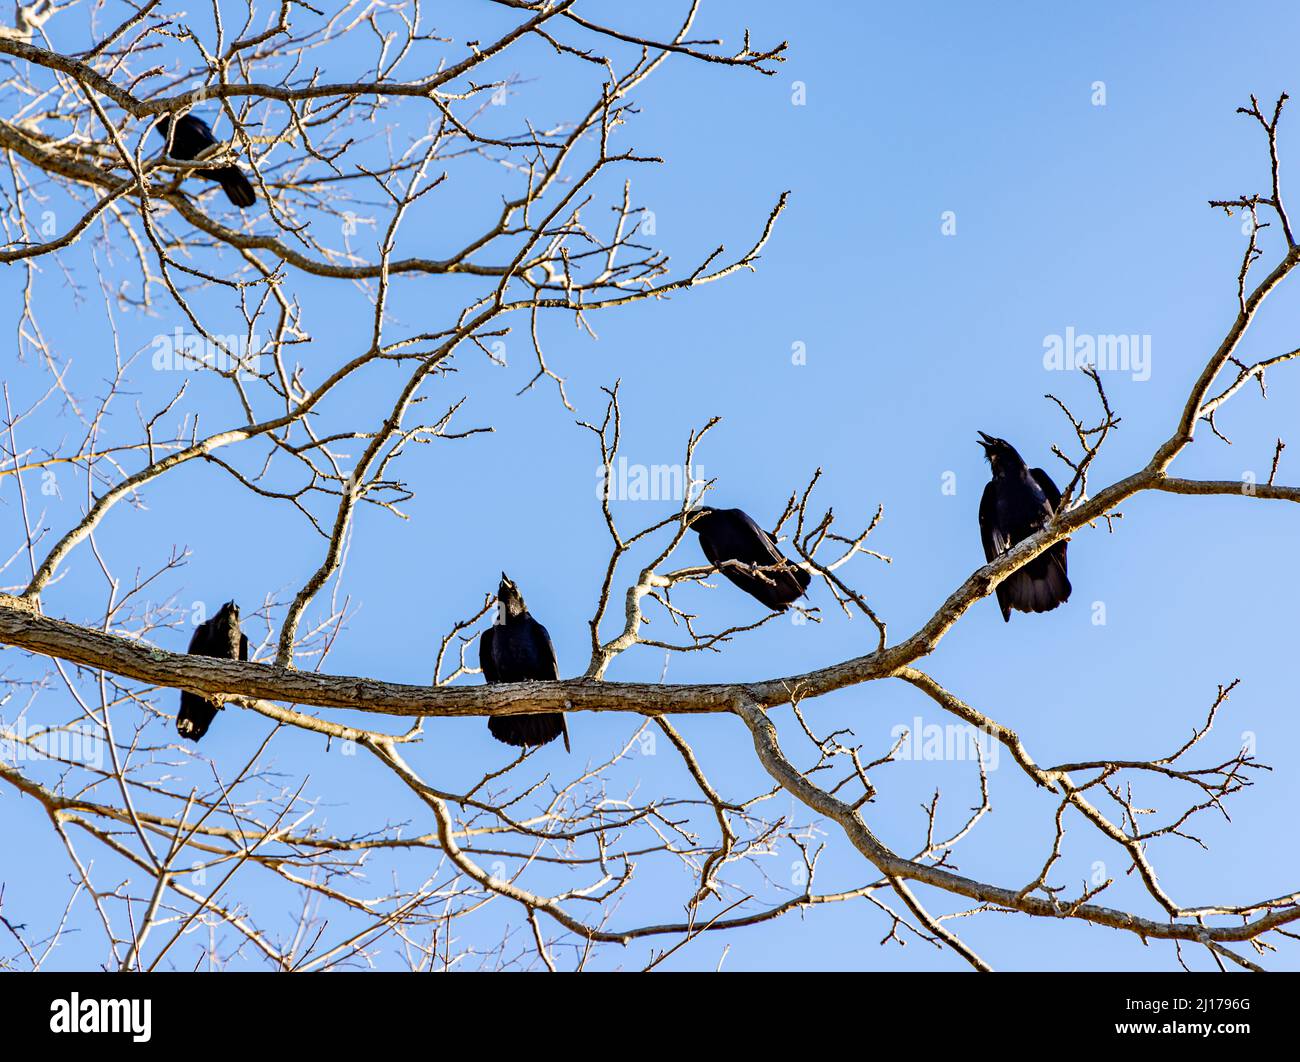 detail image of five crows on a tree limb with a blue background Stock Photo